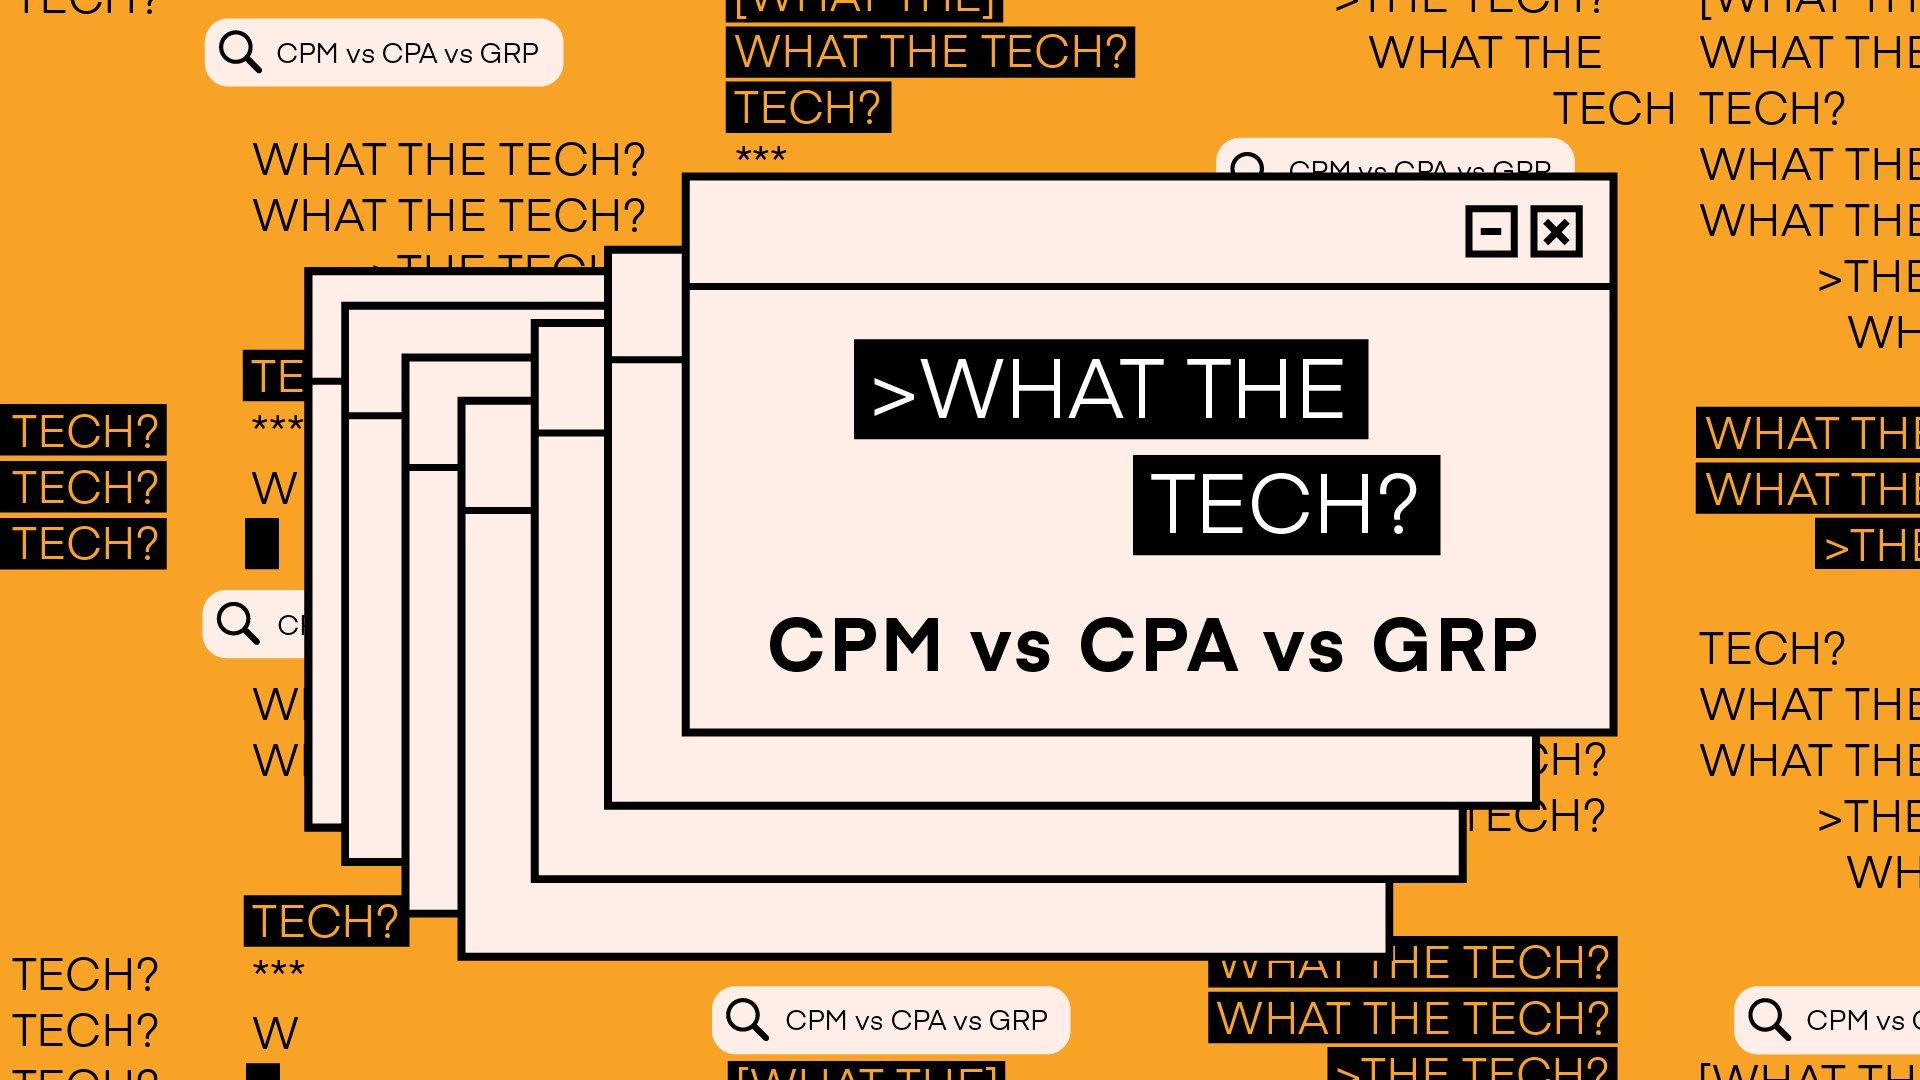 What the Tech is CPM, CPA and GRP?